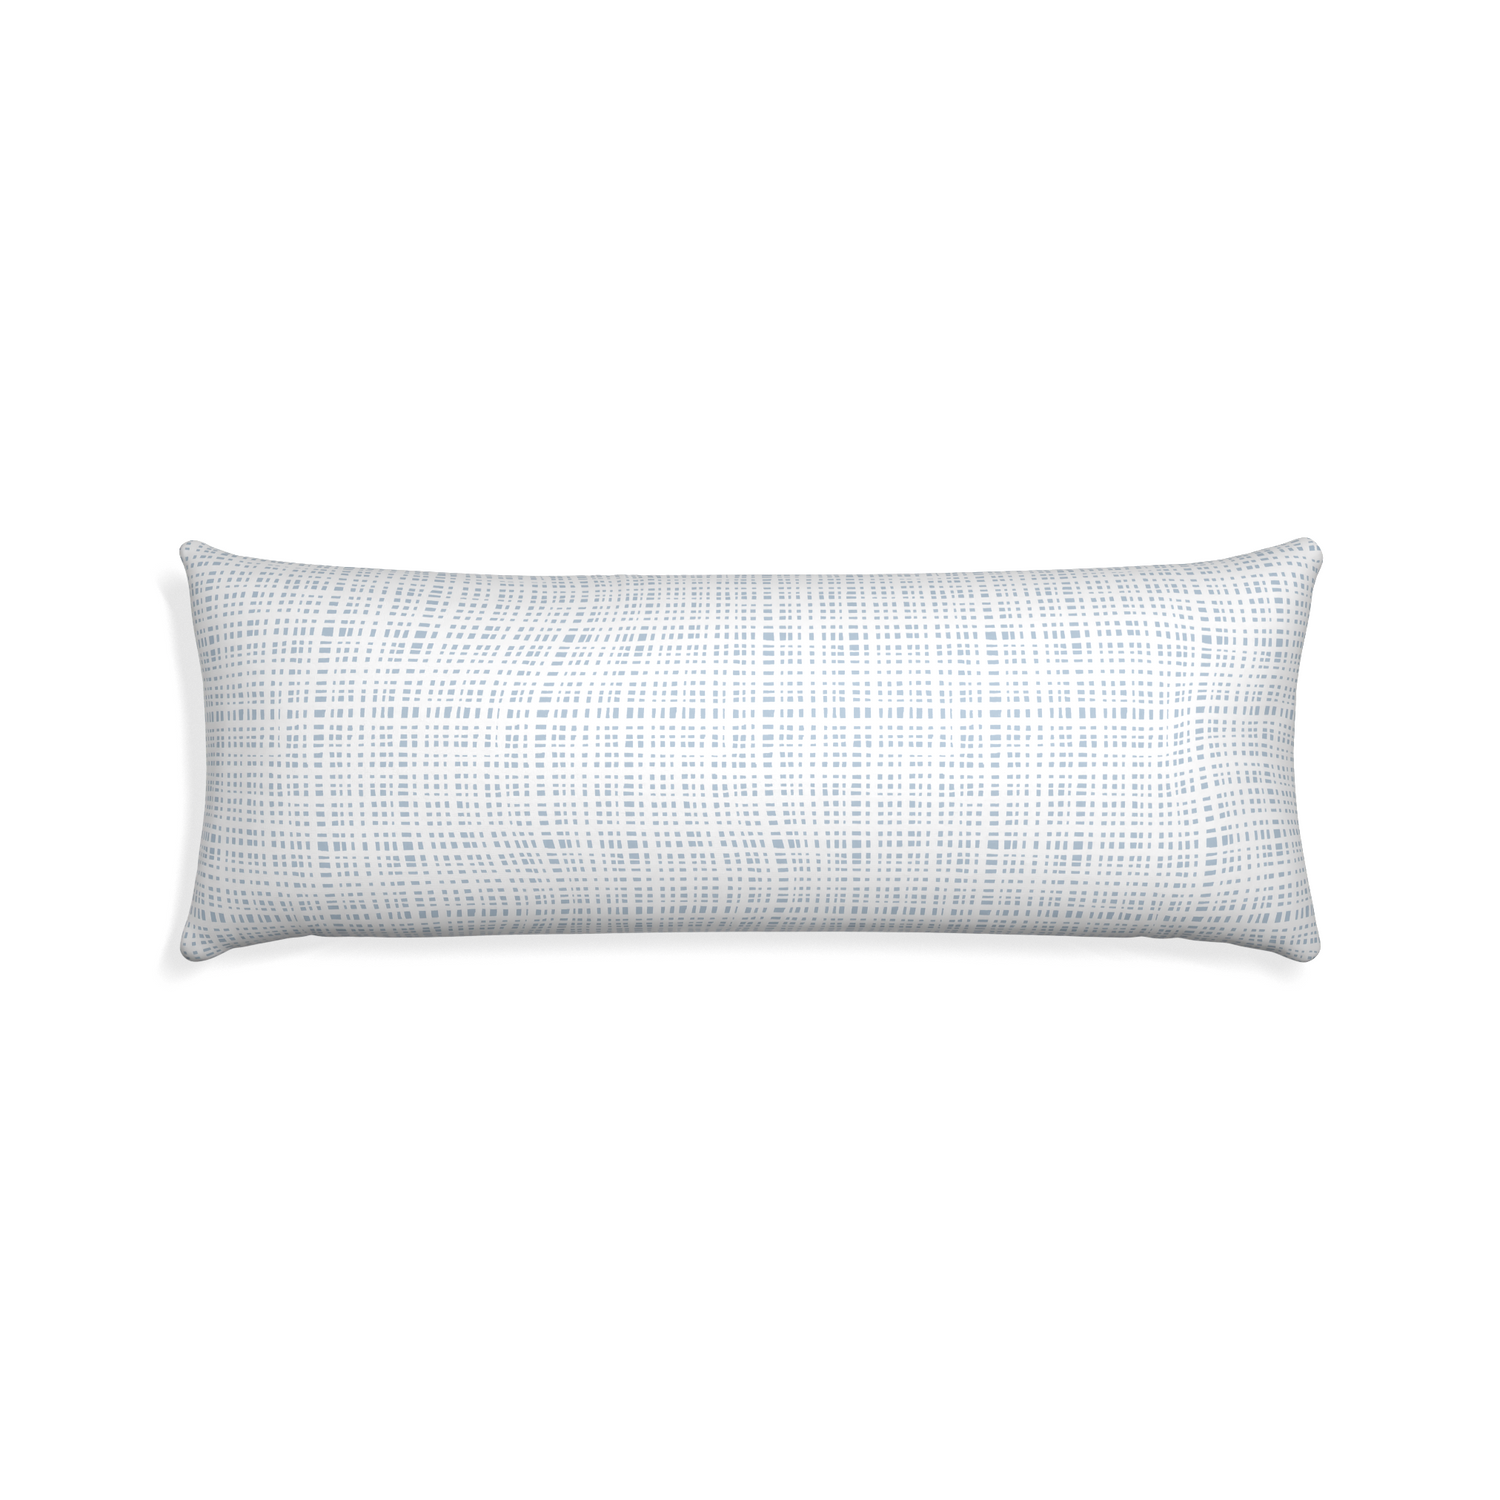 Xl-lumbar ginger sky custom plaid sky bluepillow with none on white background